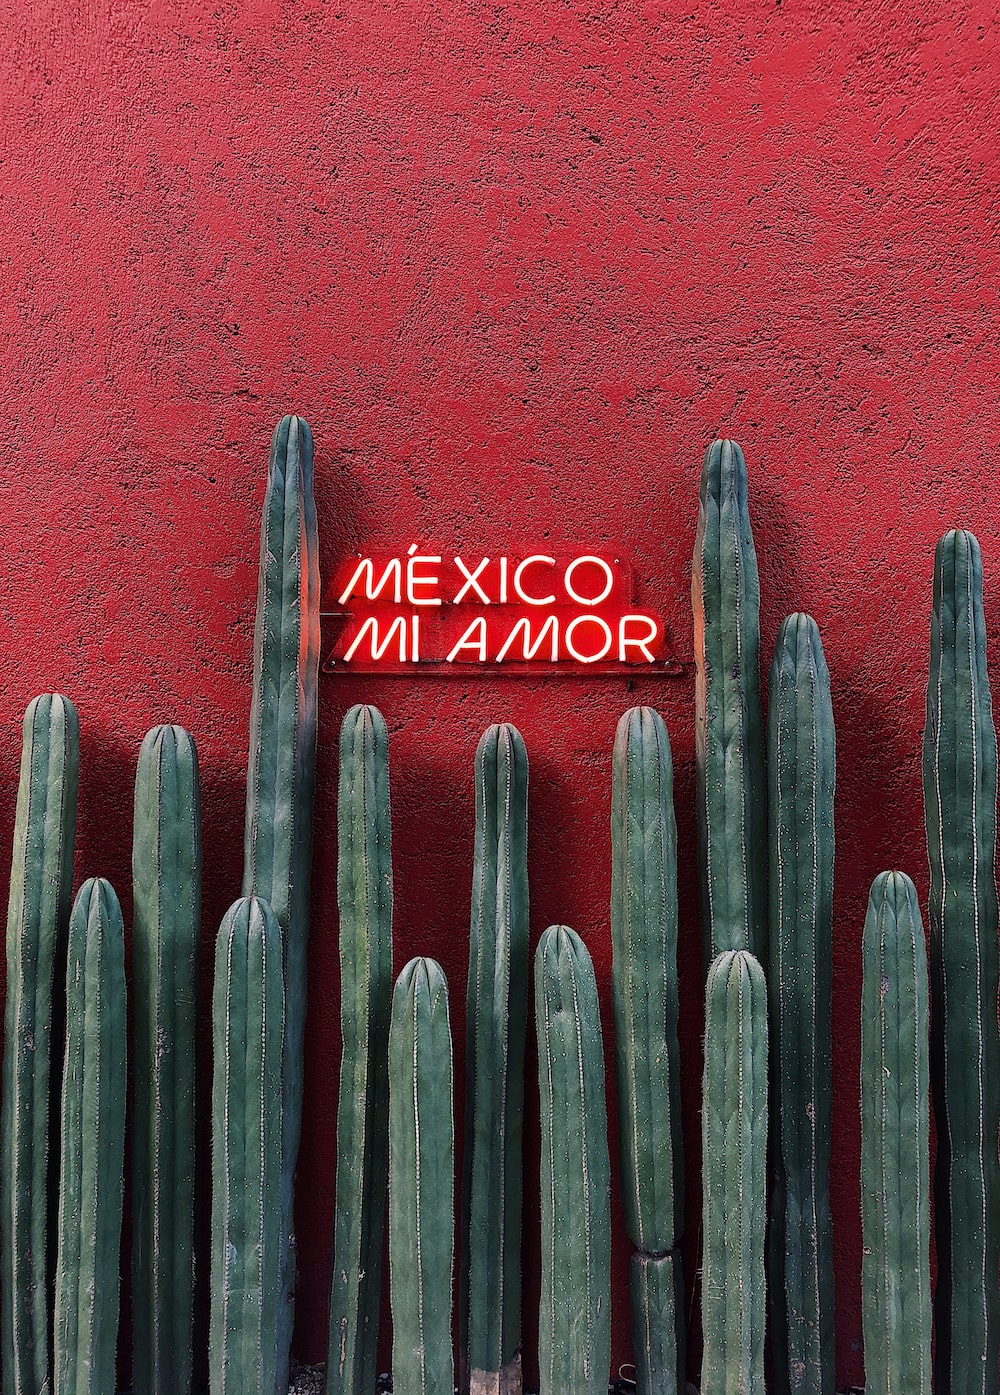 Mexico Mi Amor Picture. Download Free Image